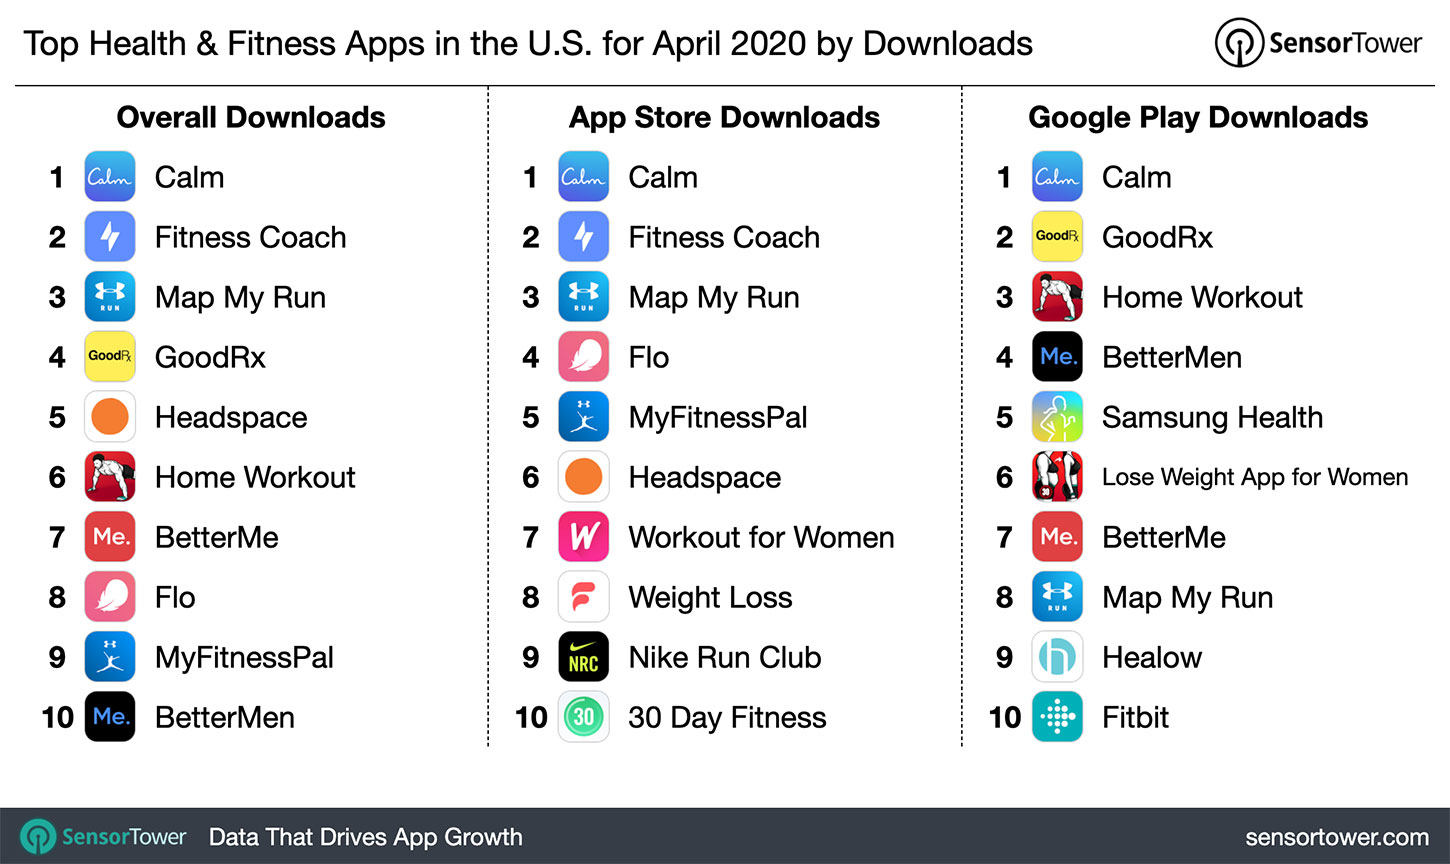 Top Health & Fitness Apps in the U.S. for April 2020 by Downloads